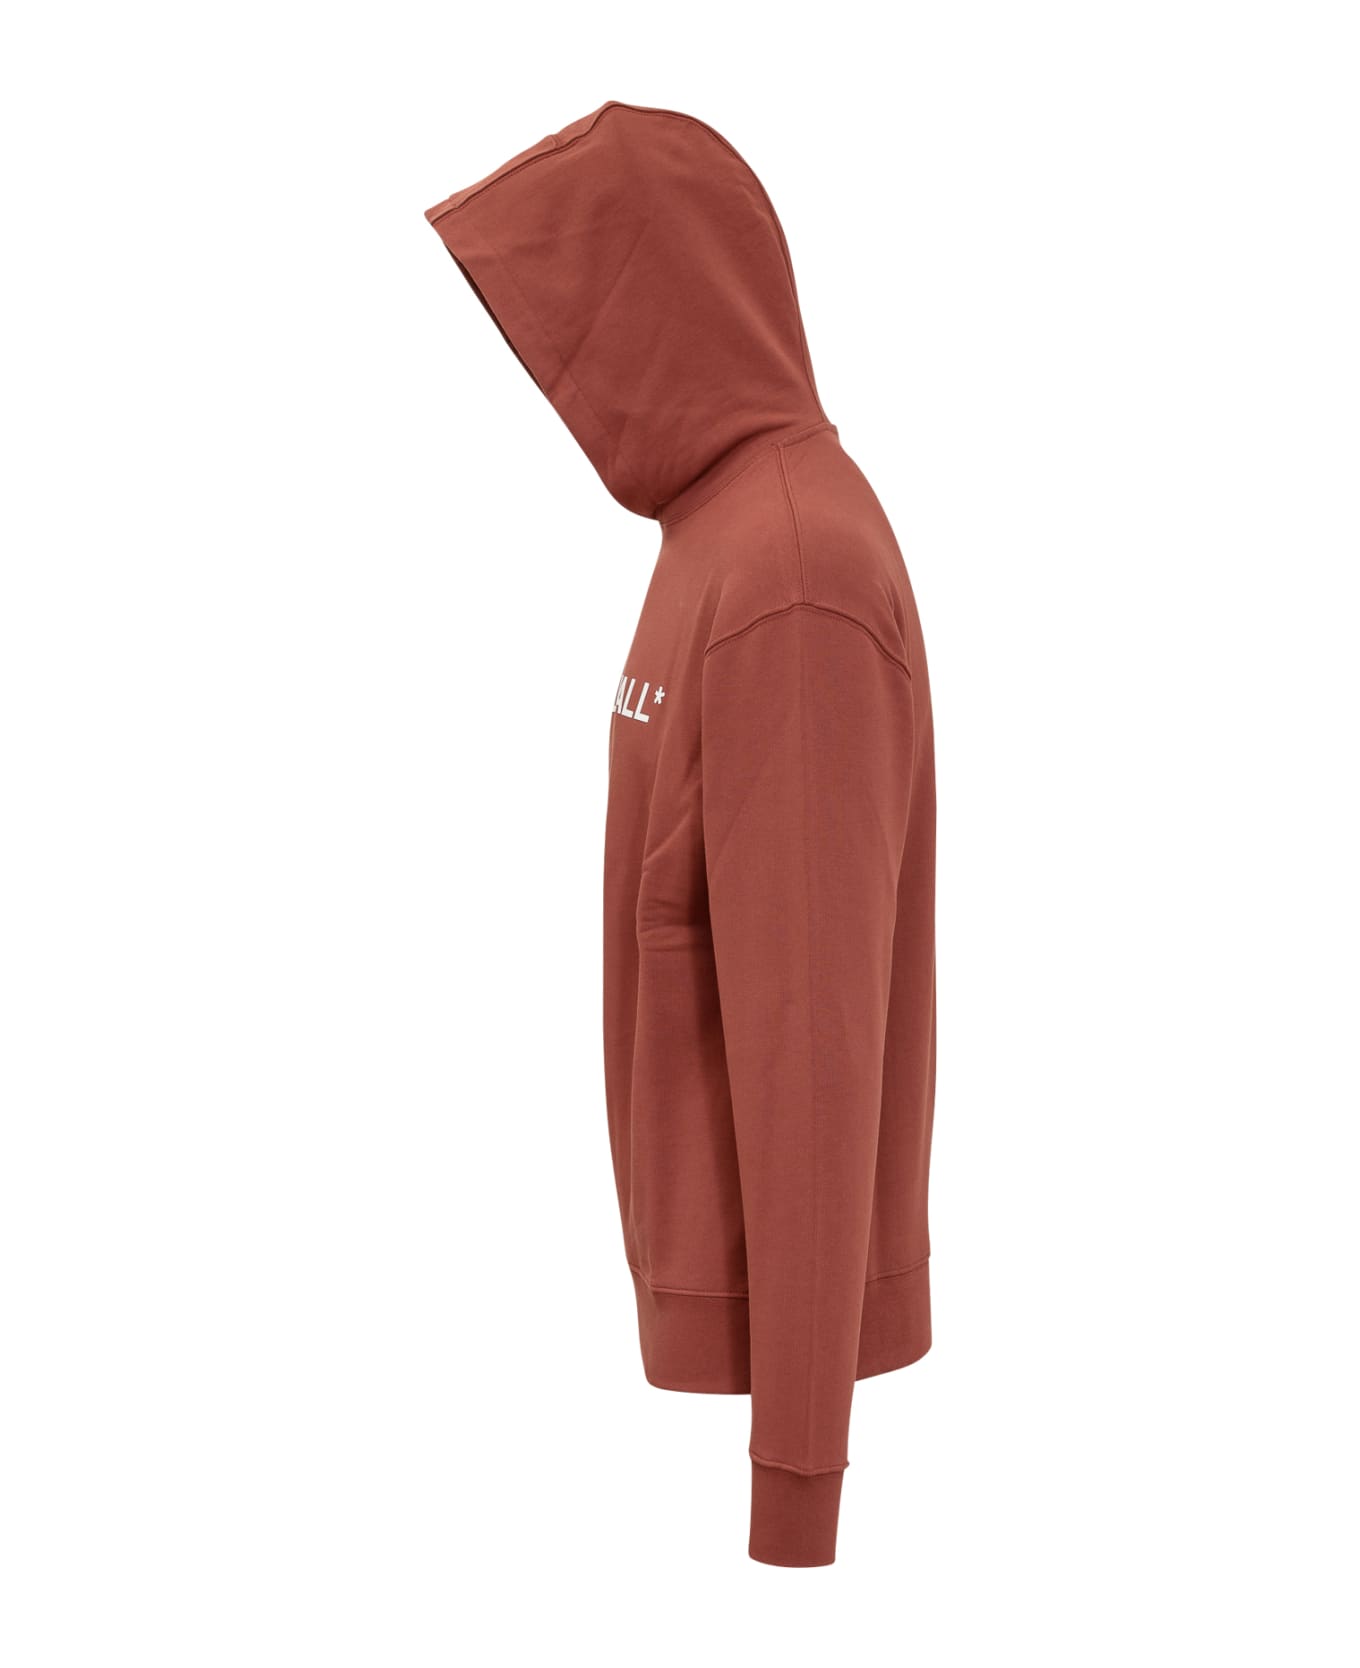 A-COLD-WALL Essential Hoodie - BURNT RED フリース